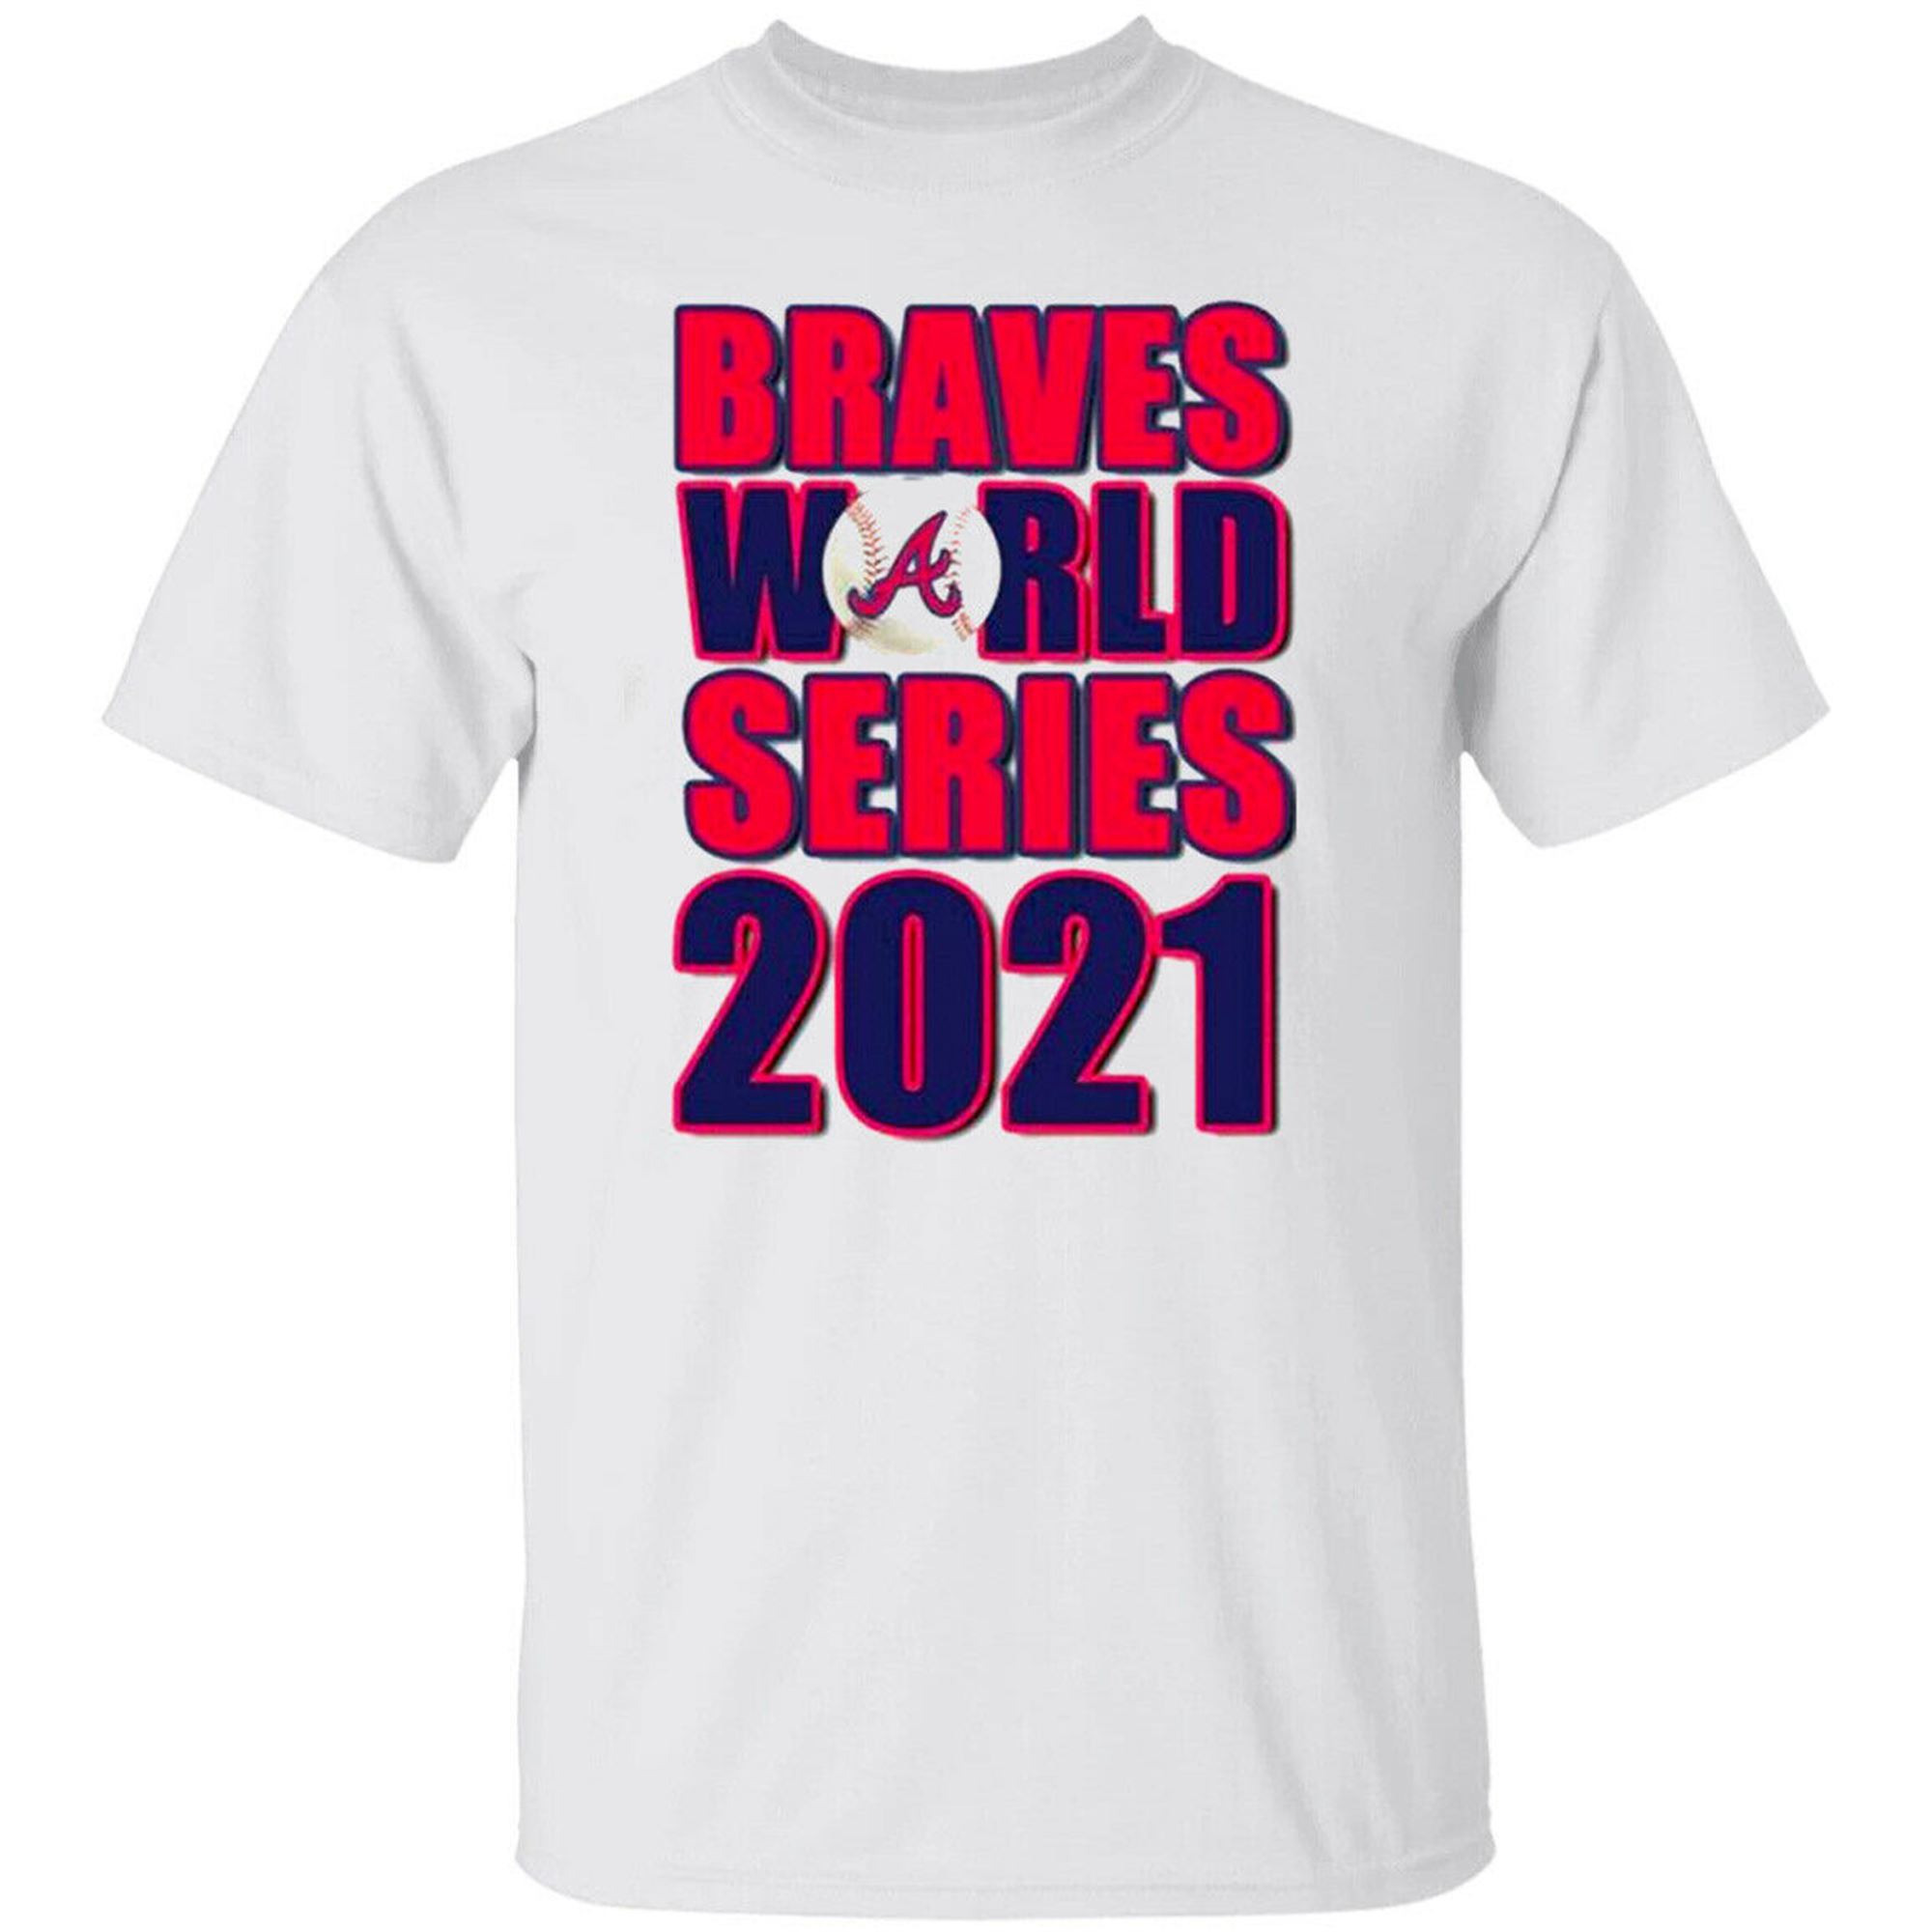 Atlanta Braves 2021 World Series Champions T-shirt All Size S-5xl Plus Size Up To 5xl